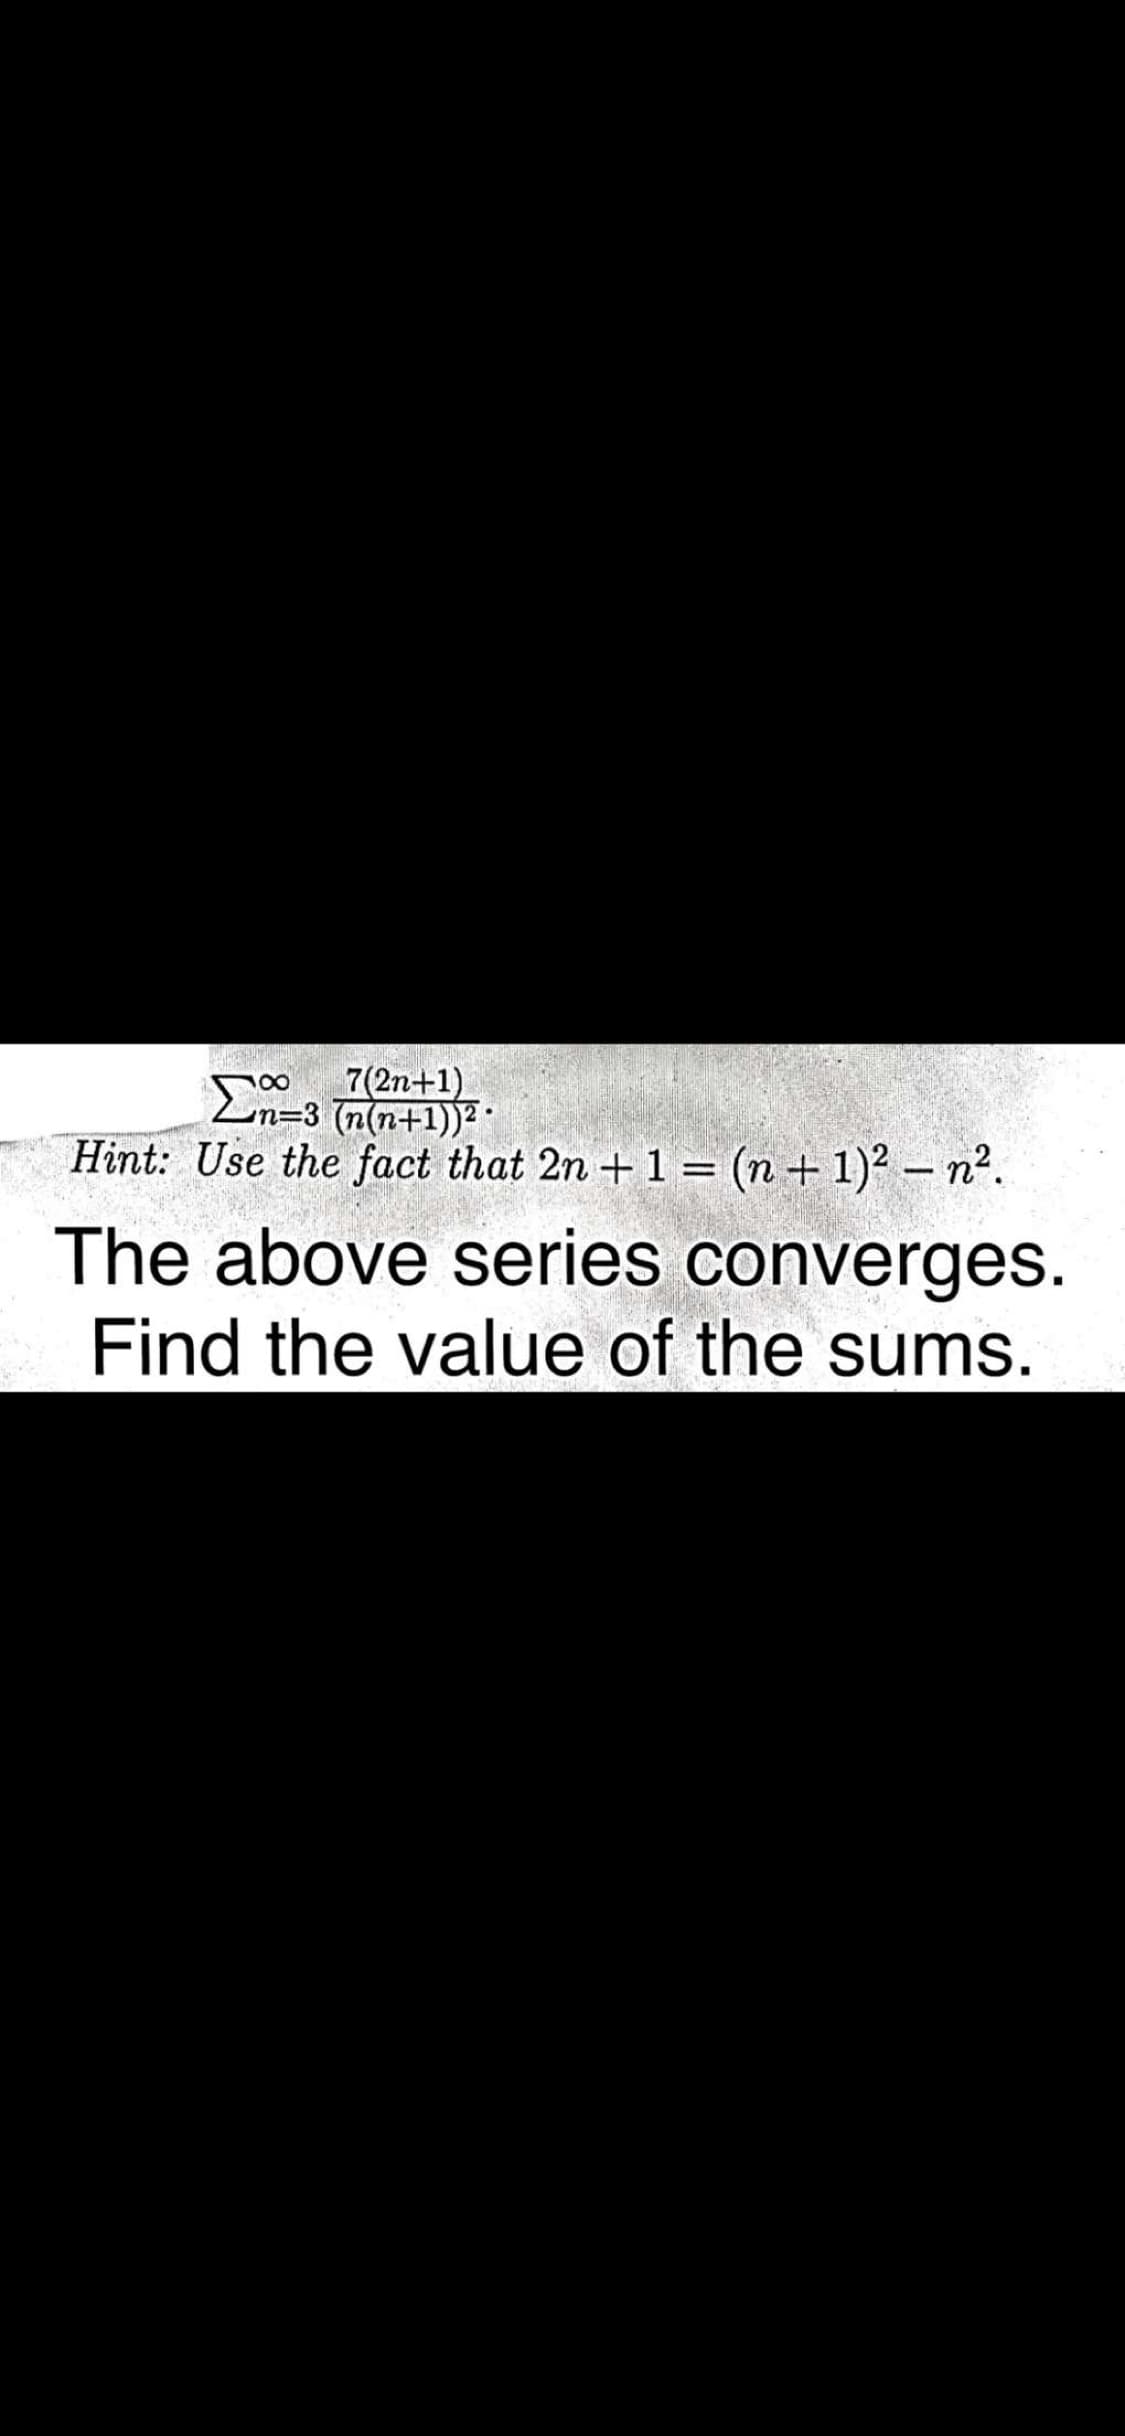 7(2n+1)
En=3 (n(n+1))² :
00
Hint: Use the fact that 2n + 1 = (n+ 1)² – n².
The above series converges.
Find the value of the sums.
